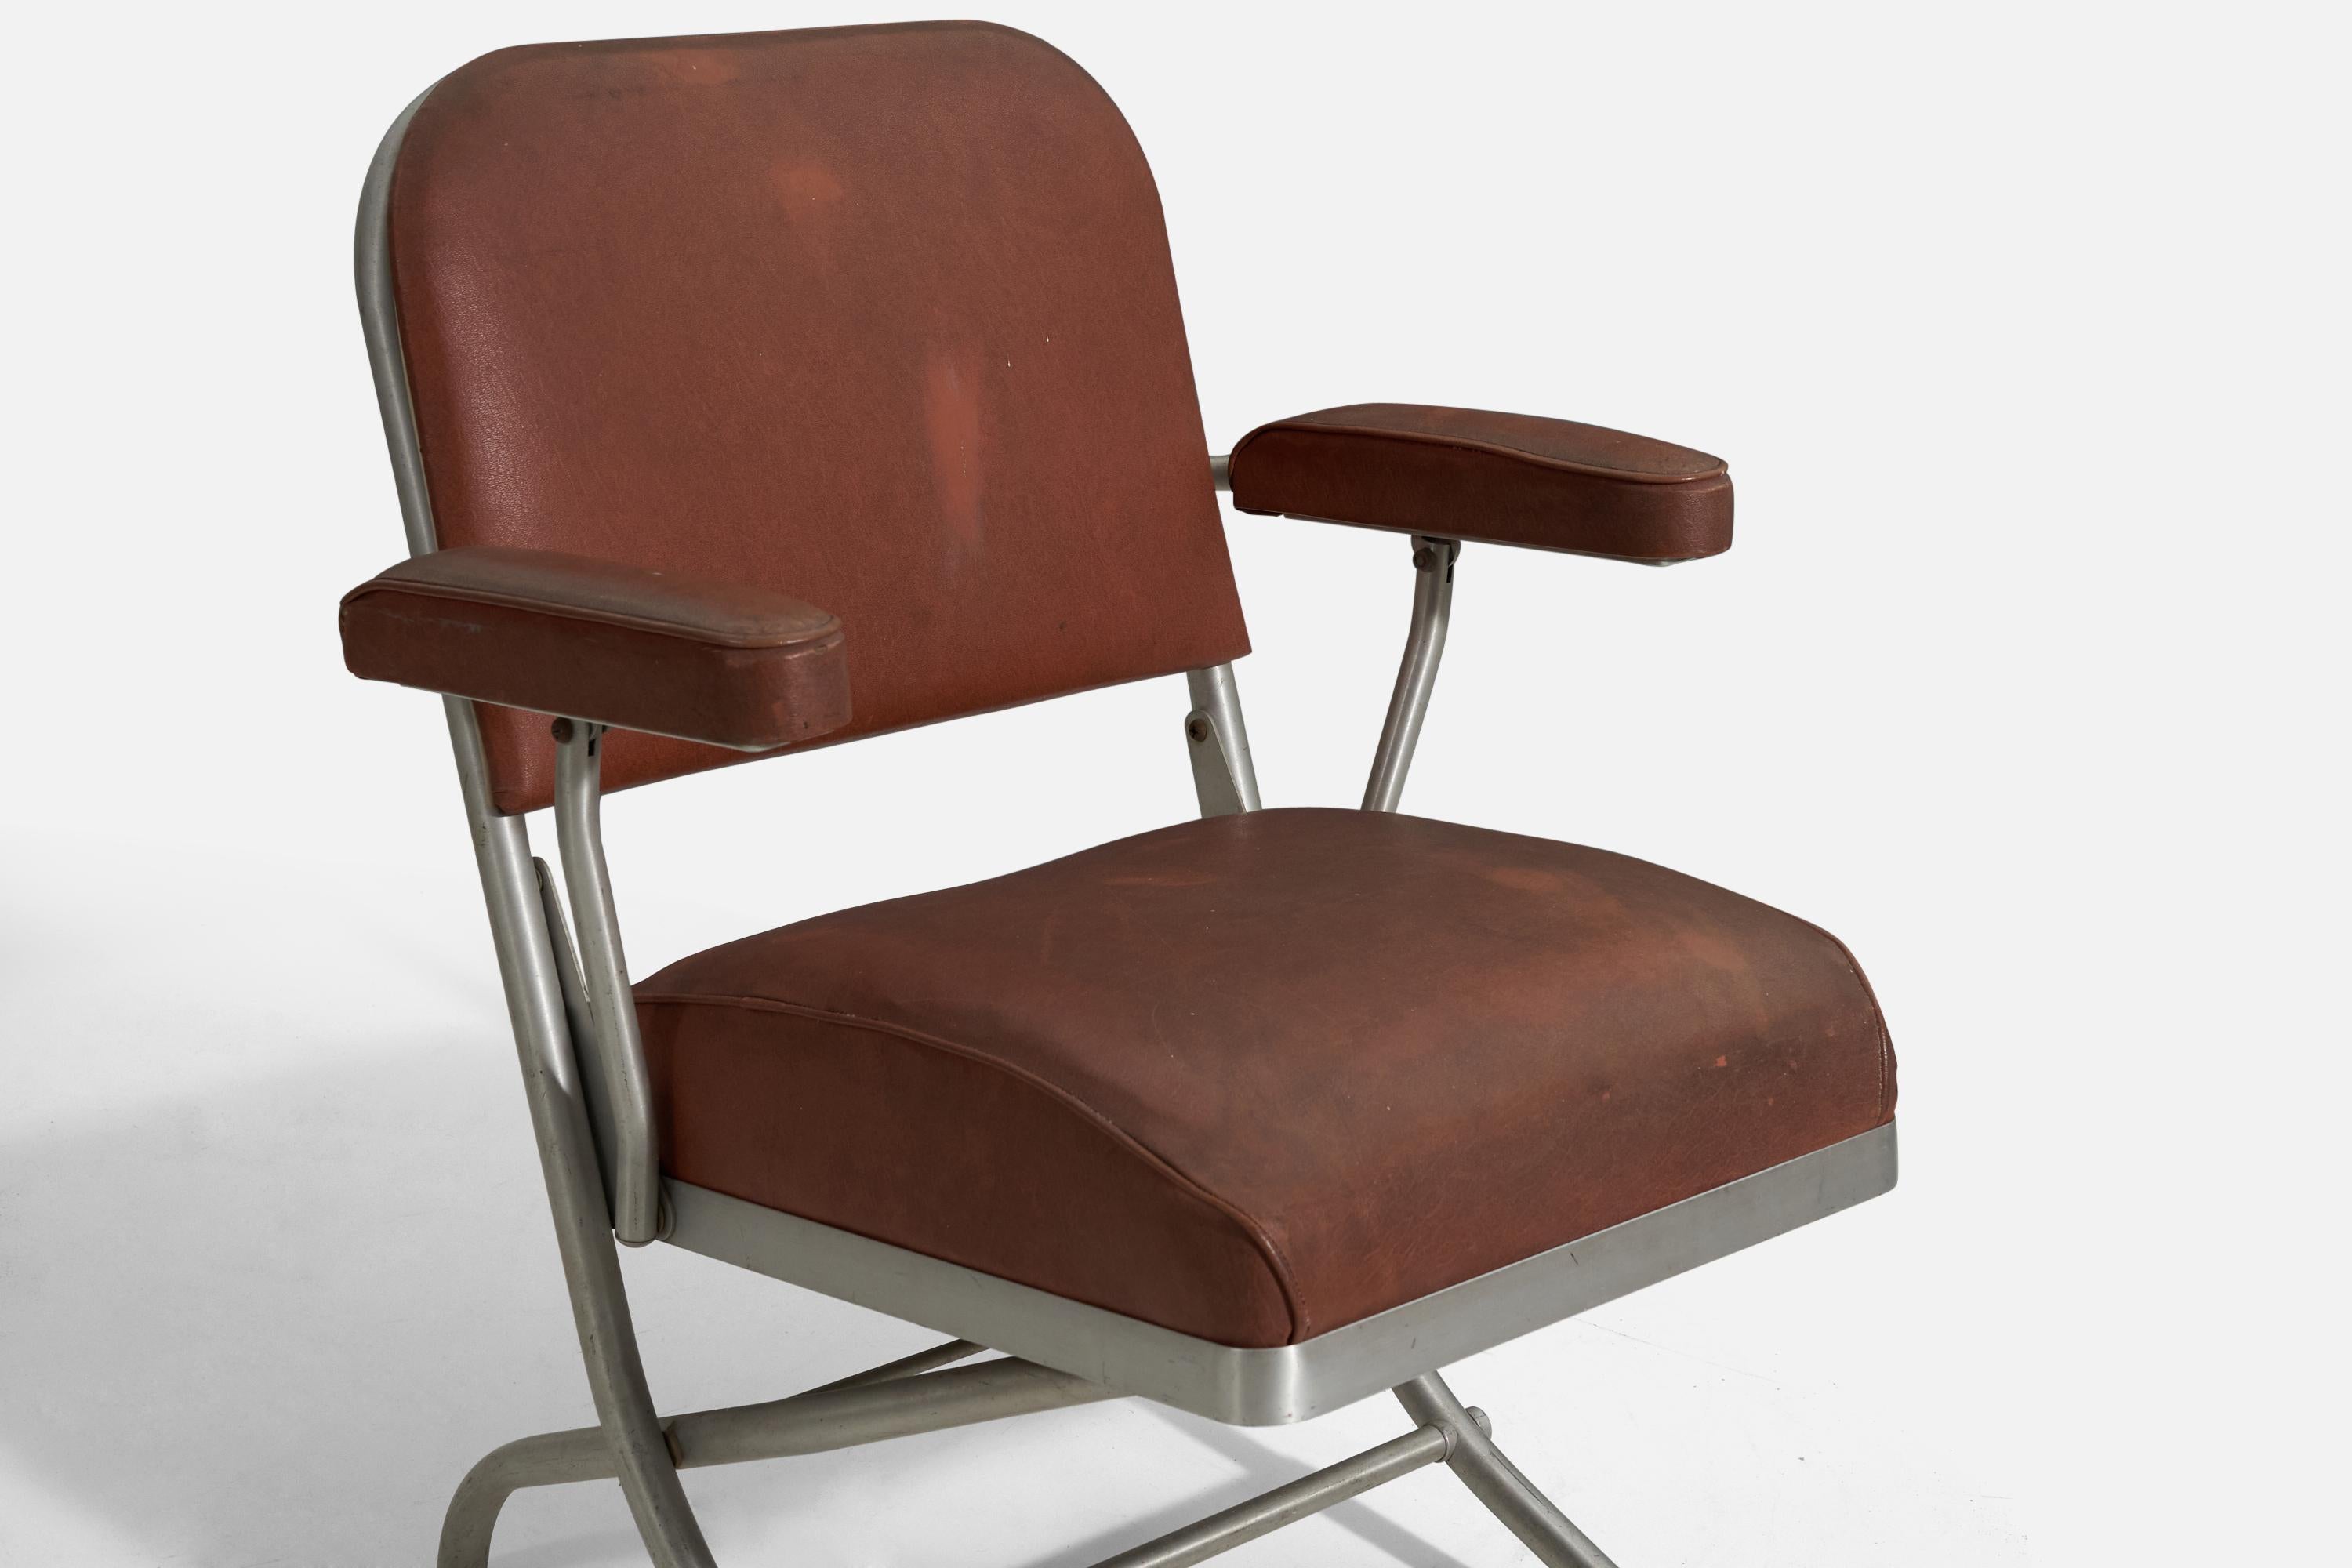 American Warren McArthur, Arm Chairs, Steel, Vinyl, United States, 1930s For Sale